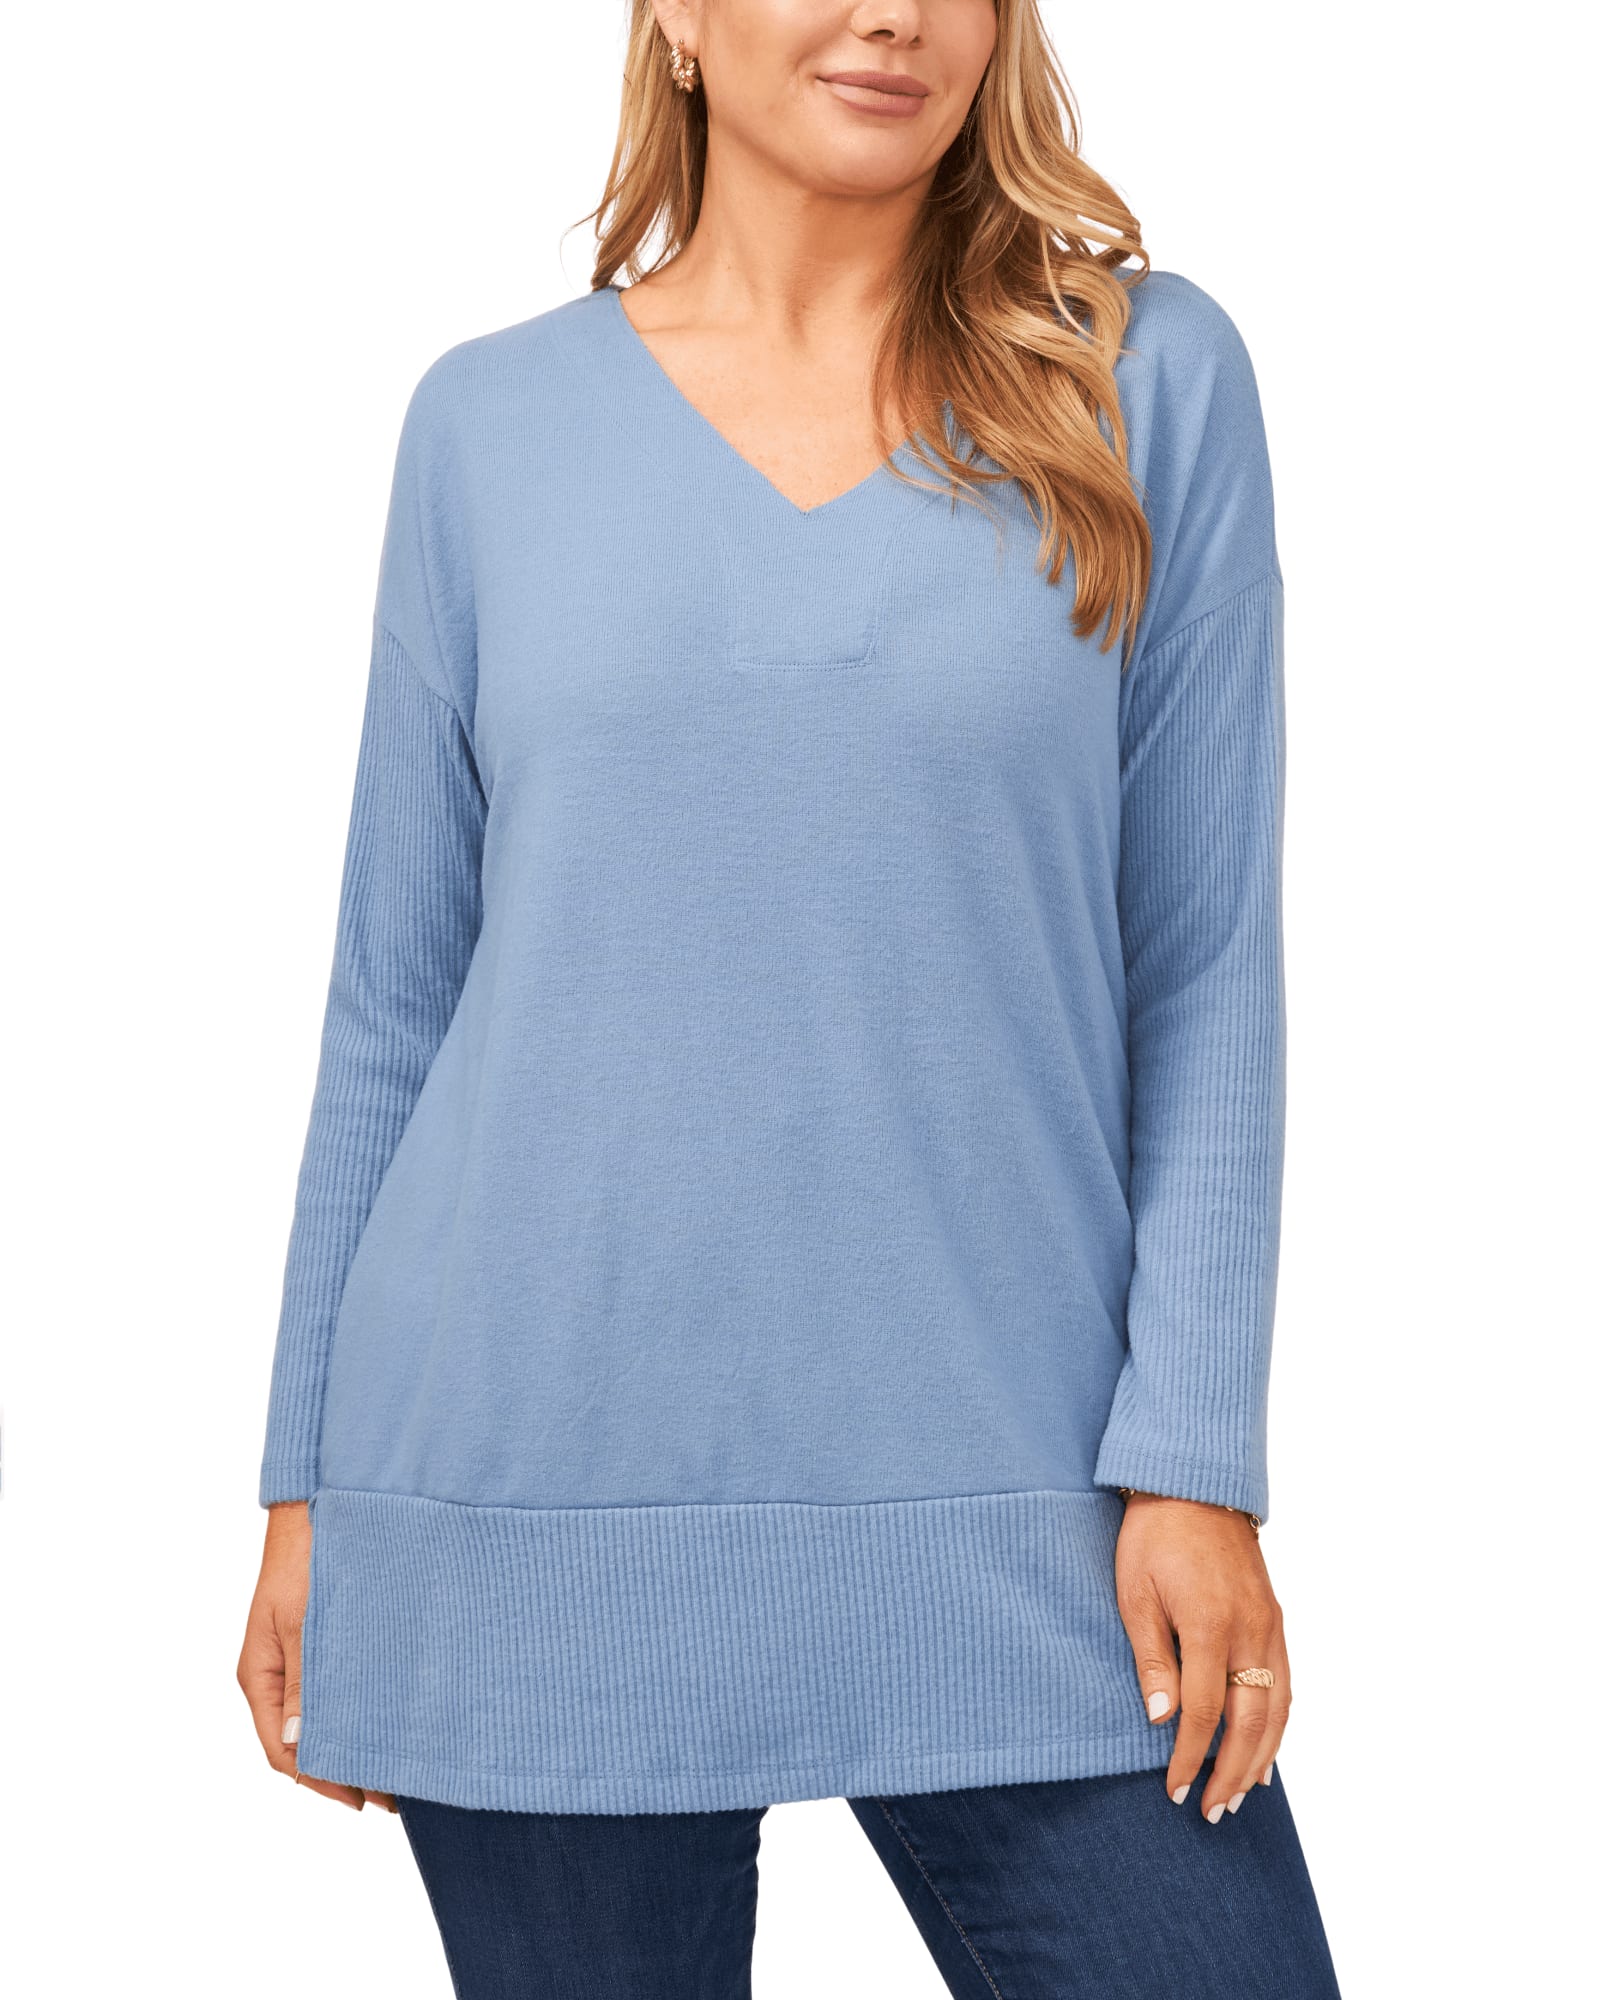 Light Blue Over-Sized Sweater (S-3XL)